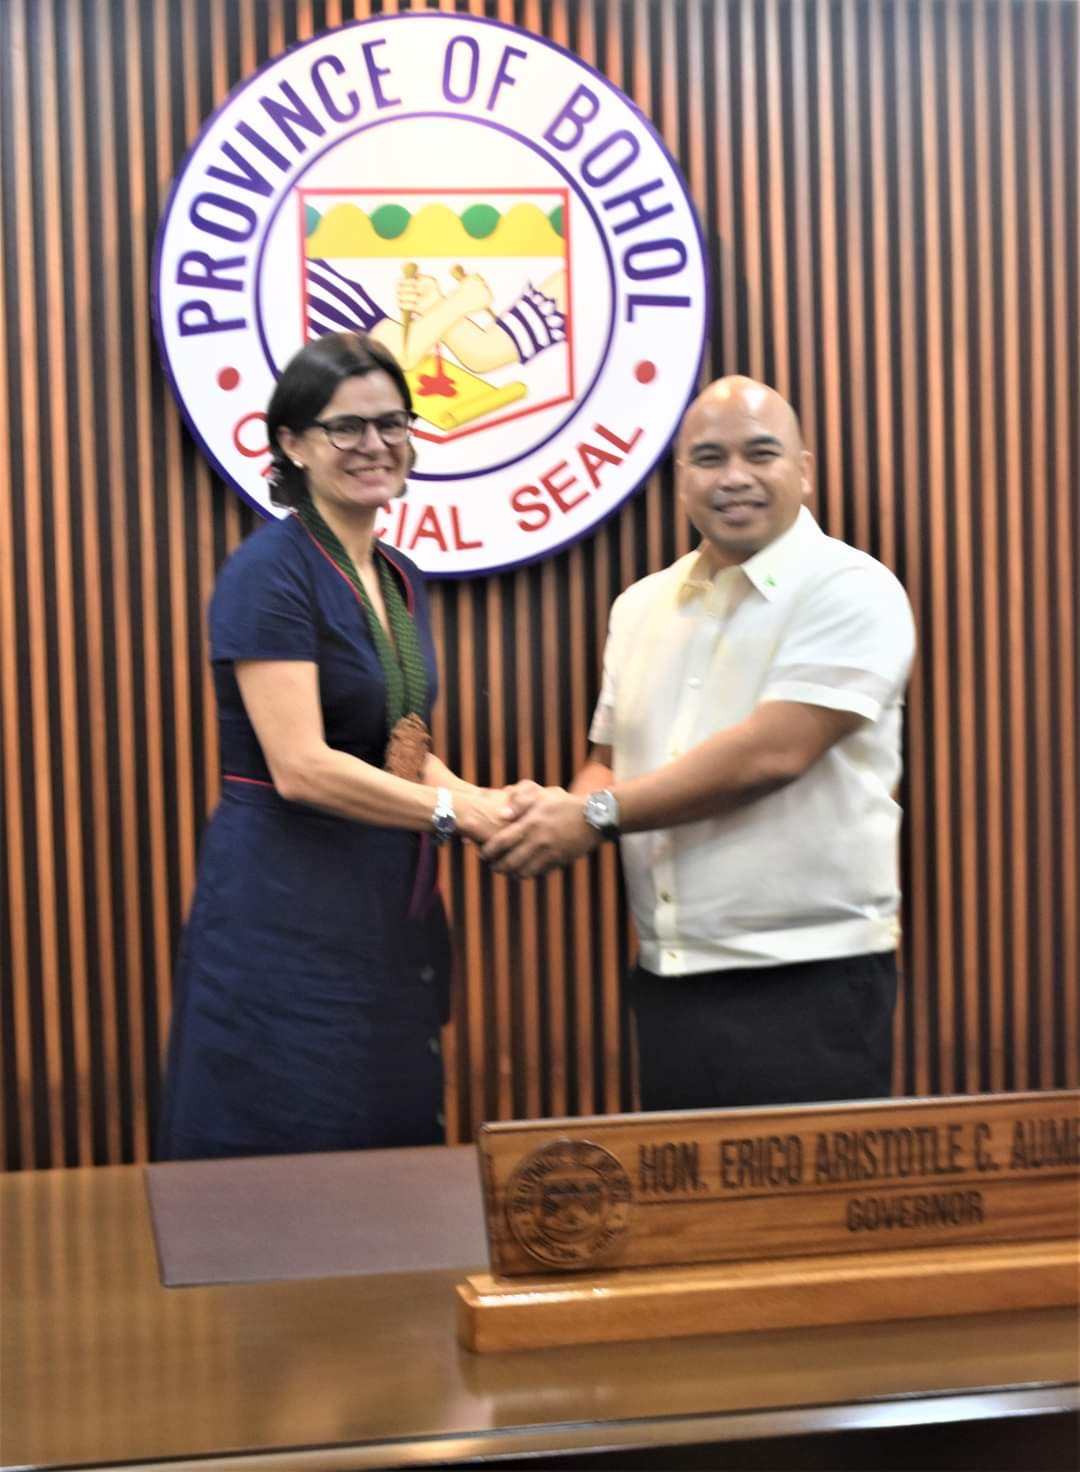 Bohol as geopark a boost for tourism here – UK envoy